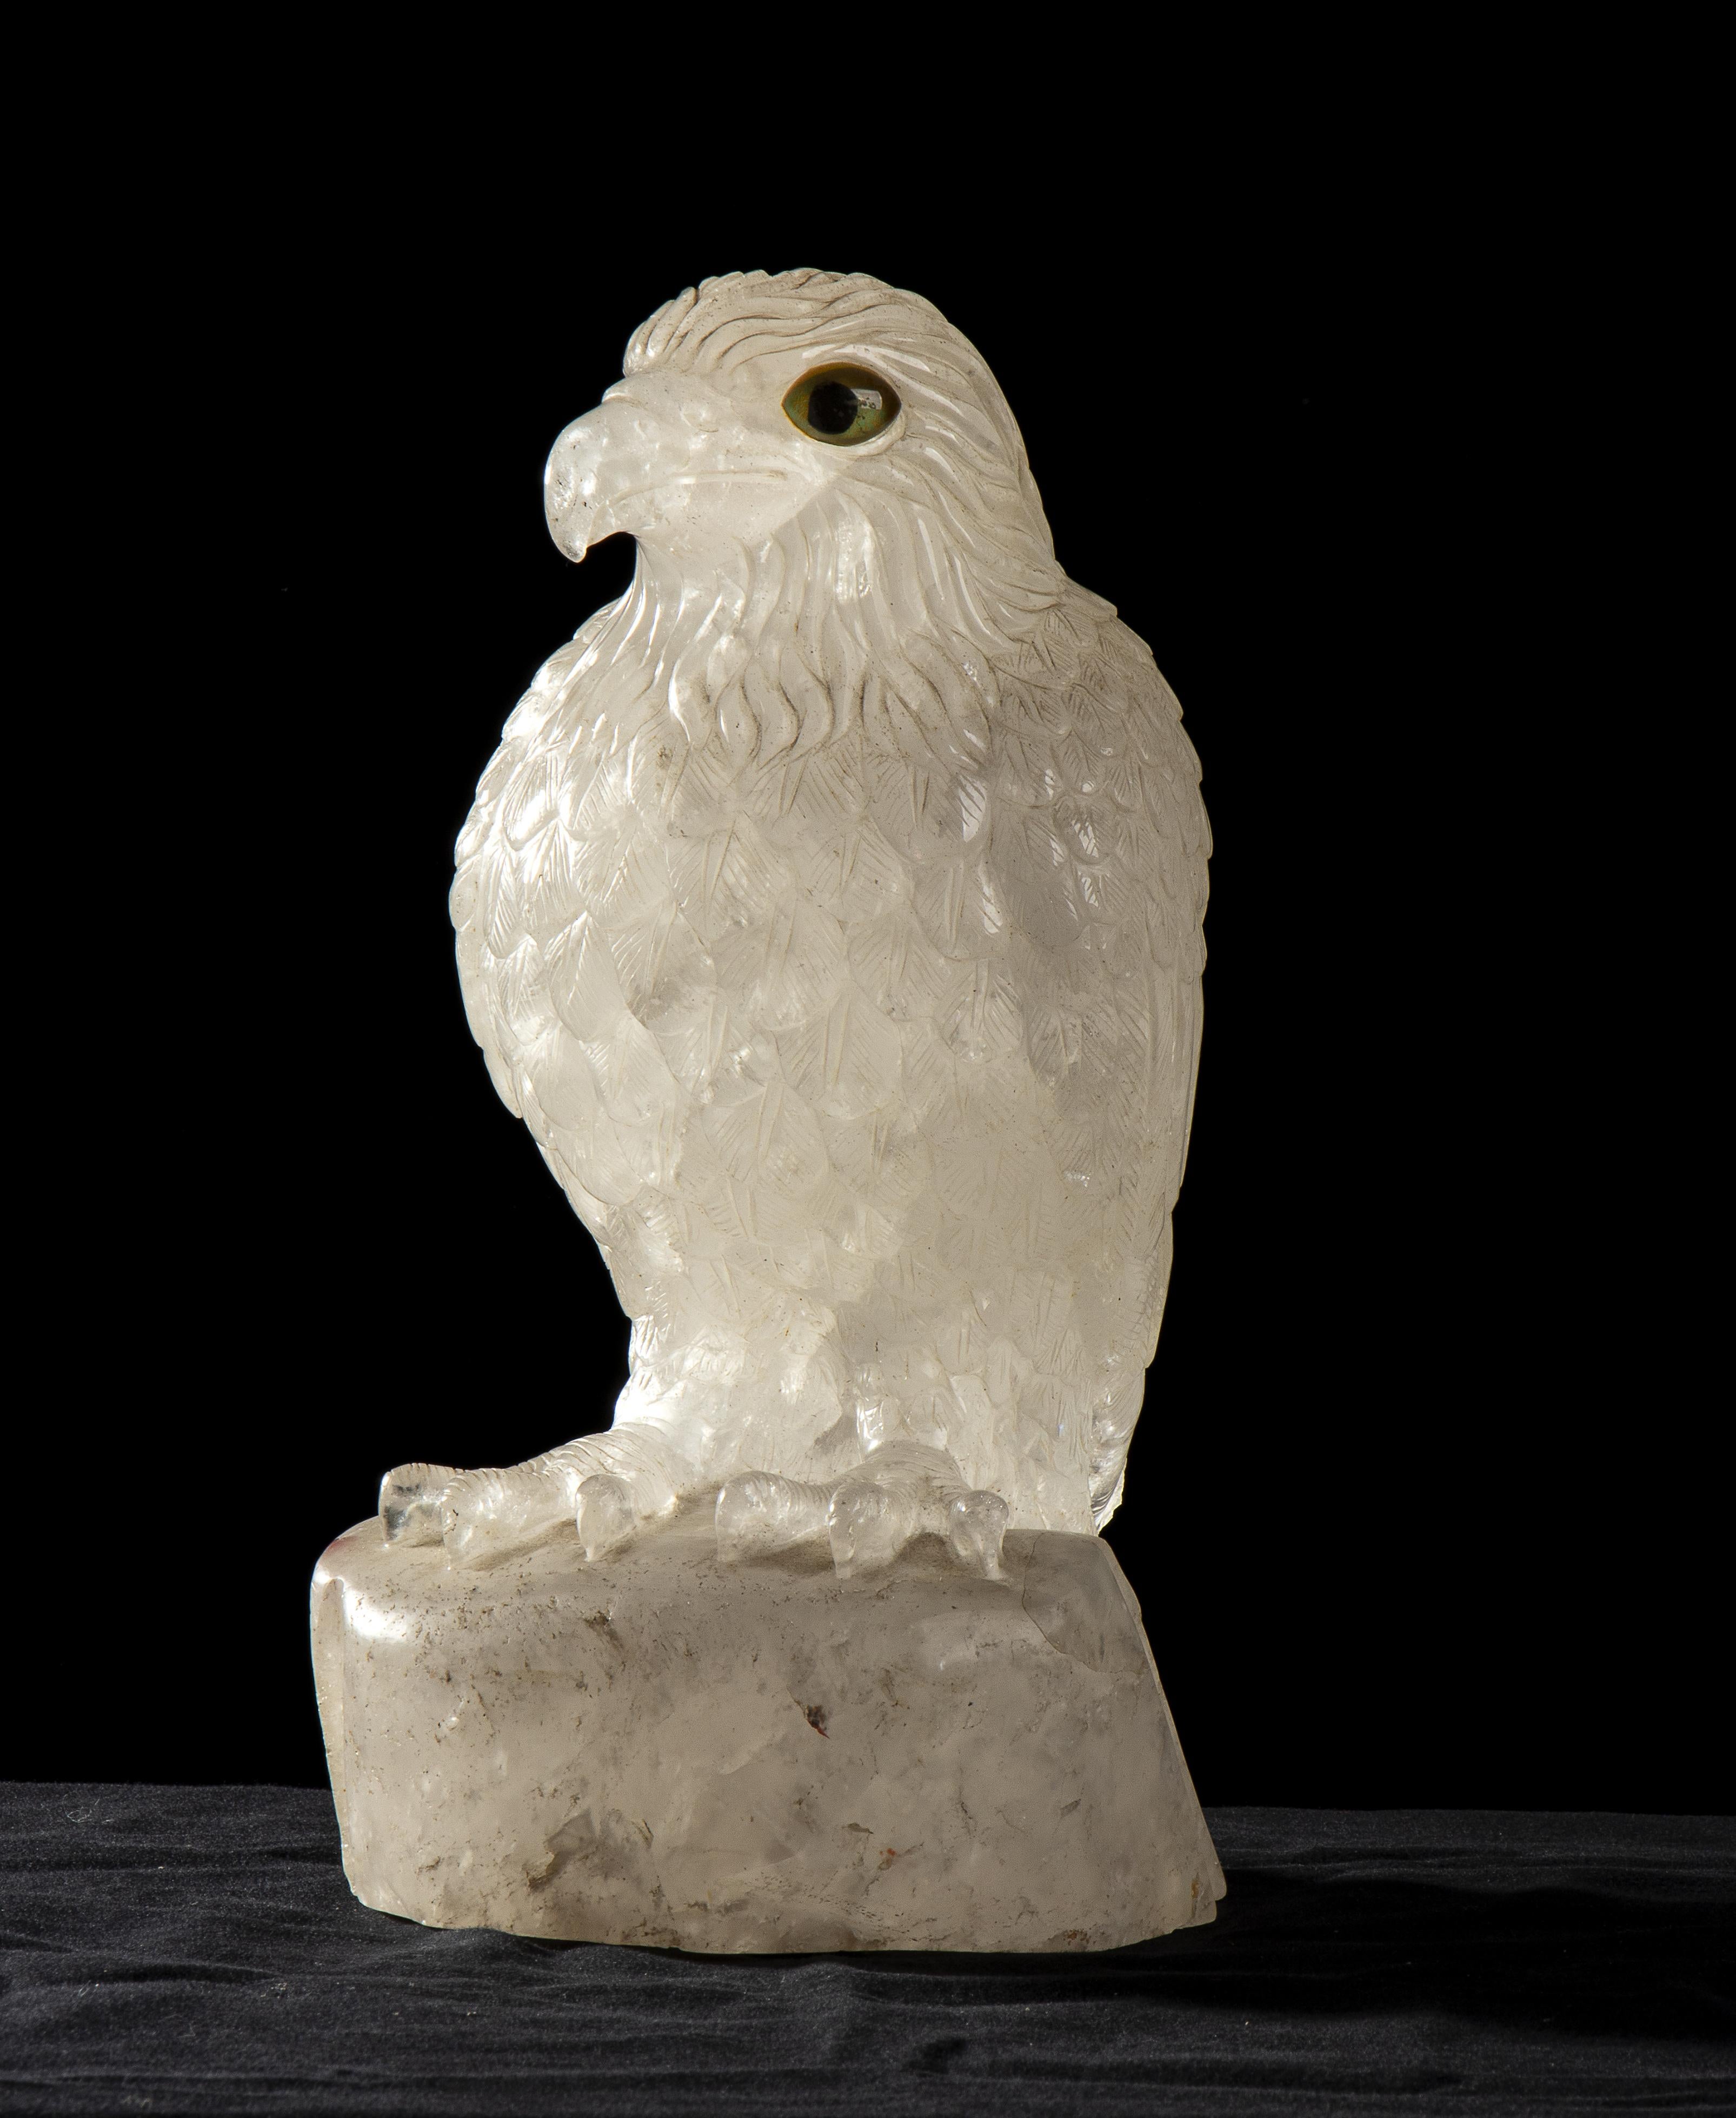 Sculpture of Eagle Carved From A Block Of Rock Crystal White Quartz  1